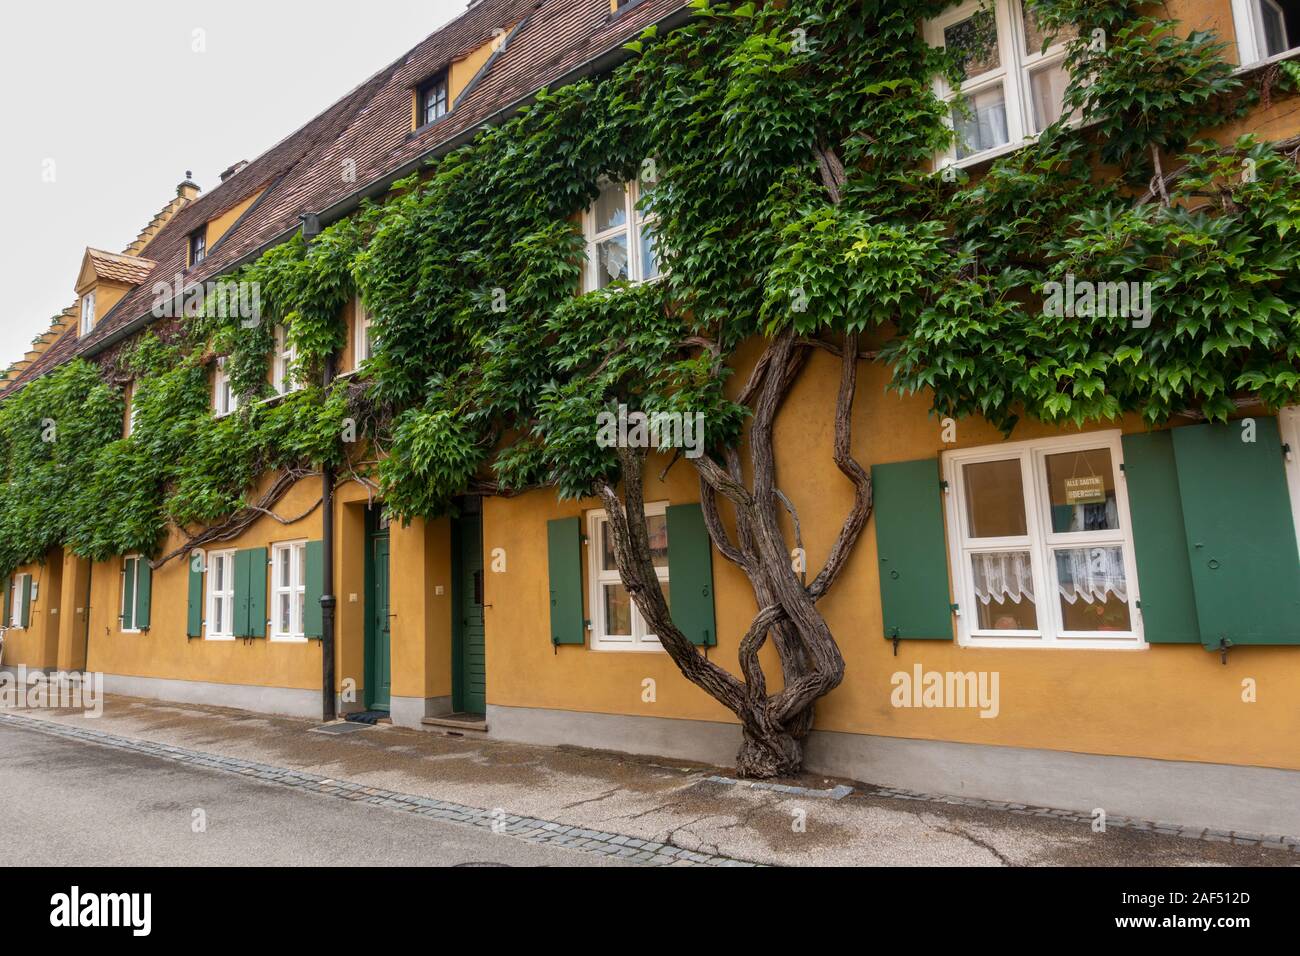 Vine tree growing on a line of houses in the Fuggerei, a walled enclave within the city of Augsburg, Bavaria, Germany. Stock Photo